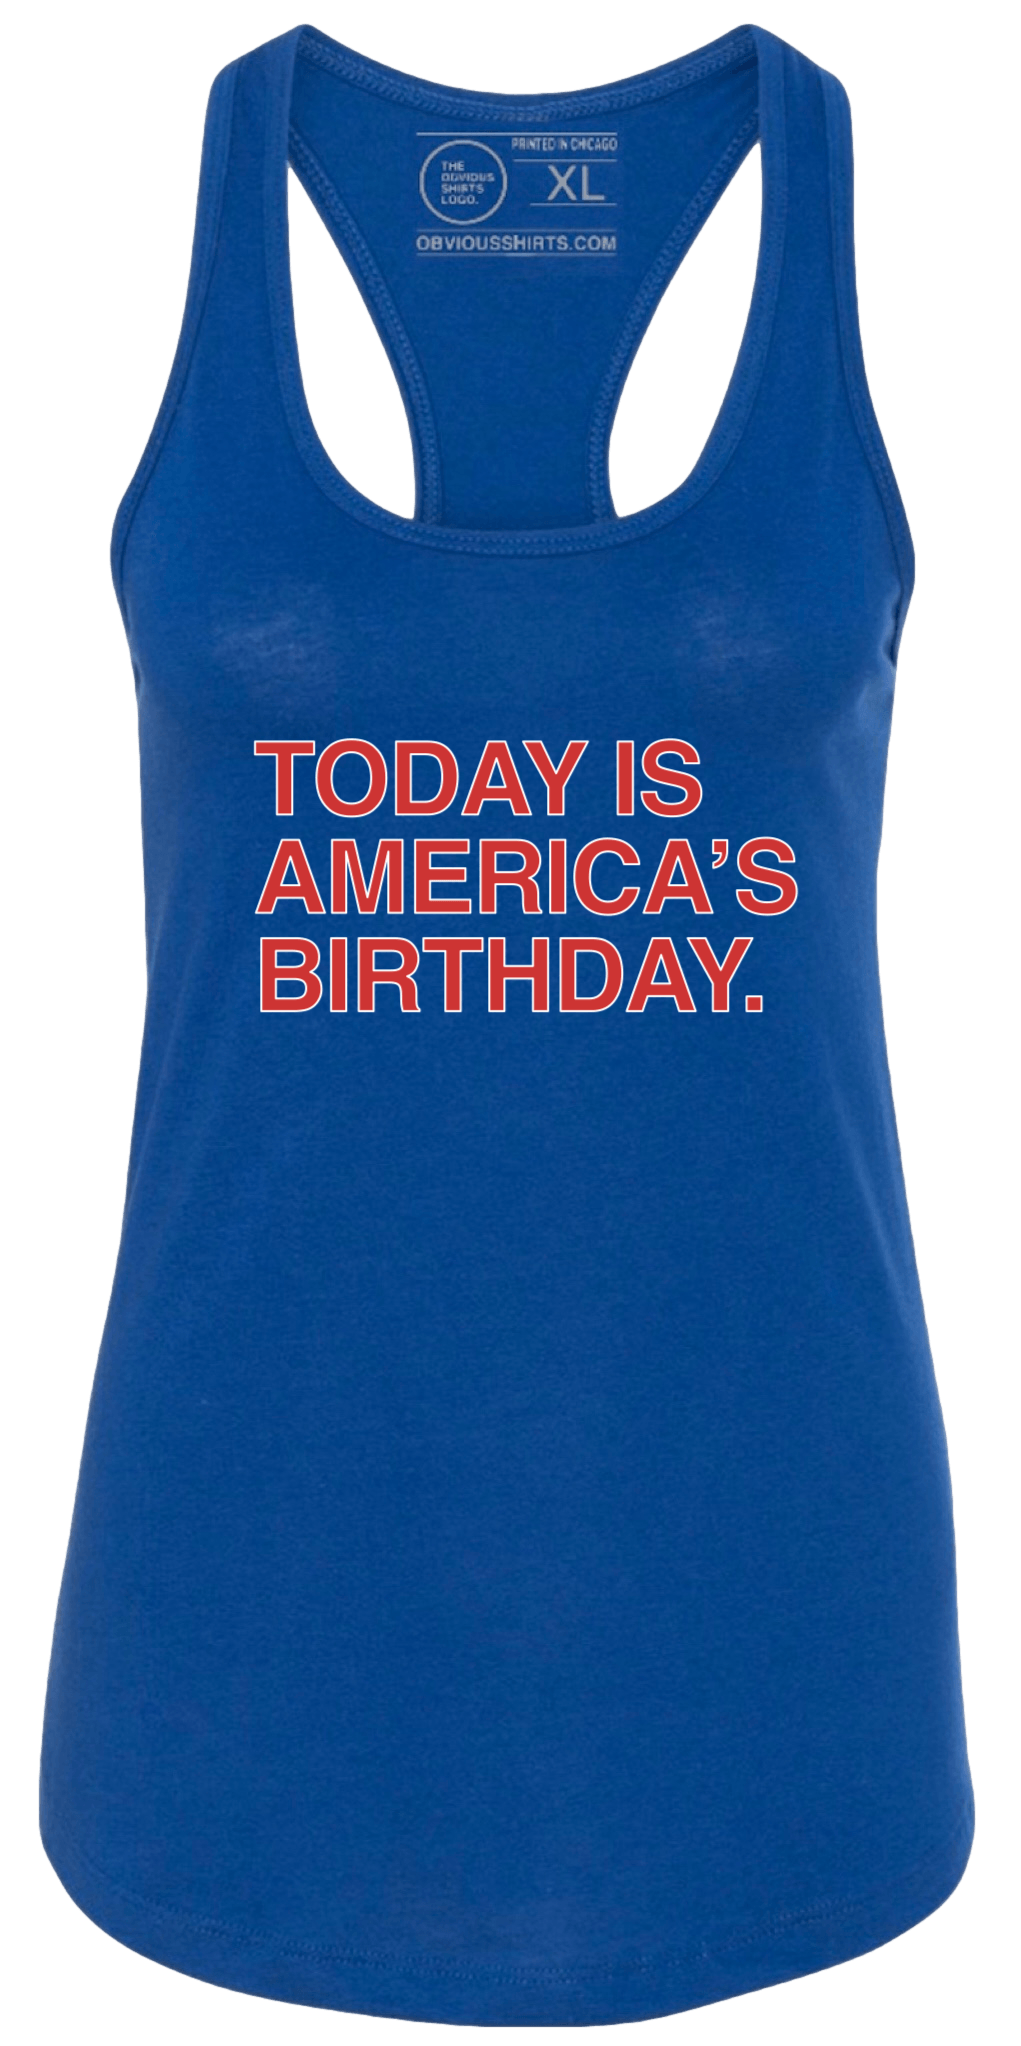 TODAY IS AMERICA'S BIRTHDAY. (WOMEN'S TANK) - OBVIOUS SHIRTS